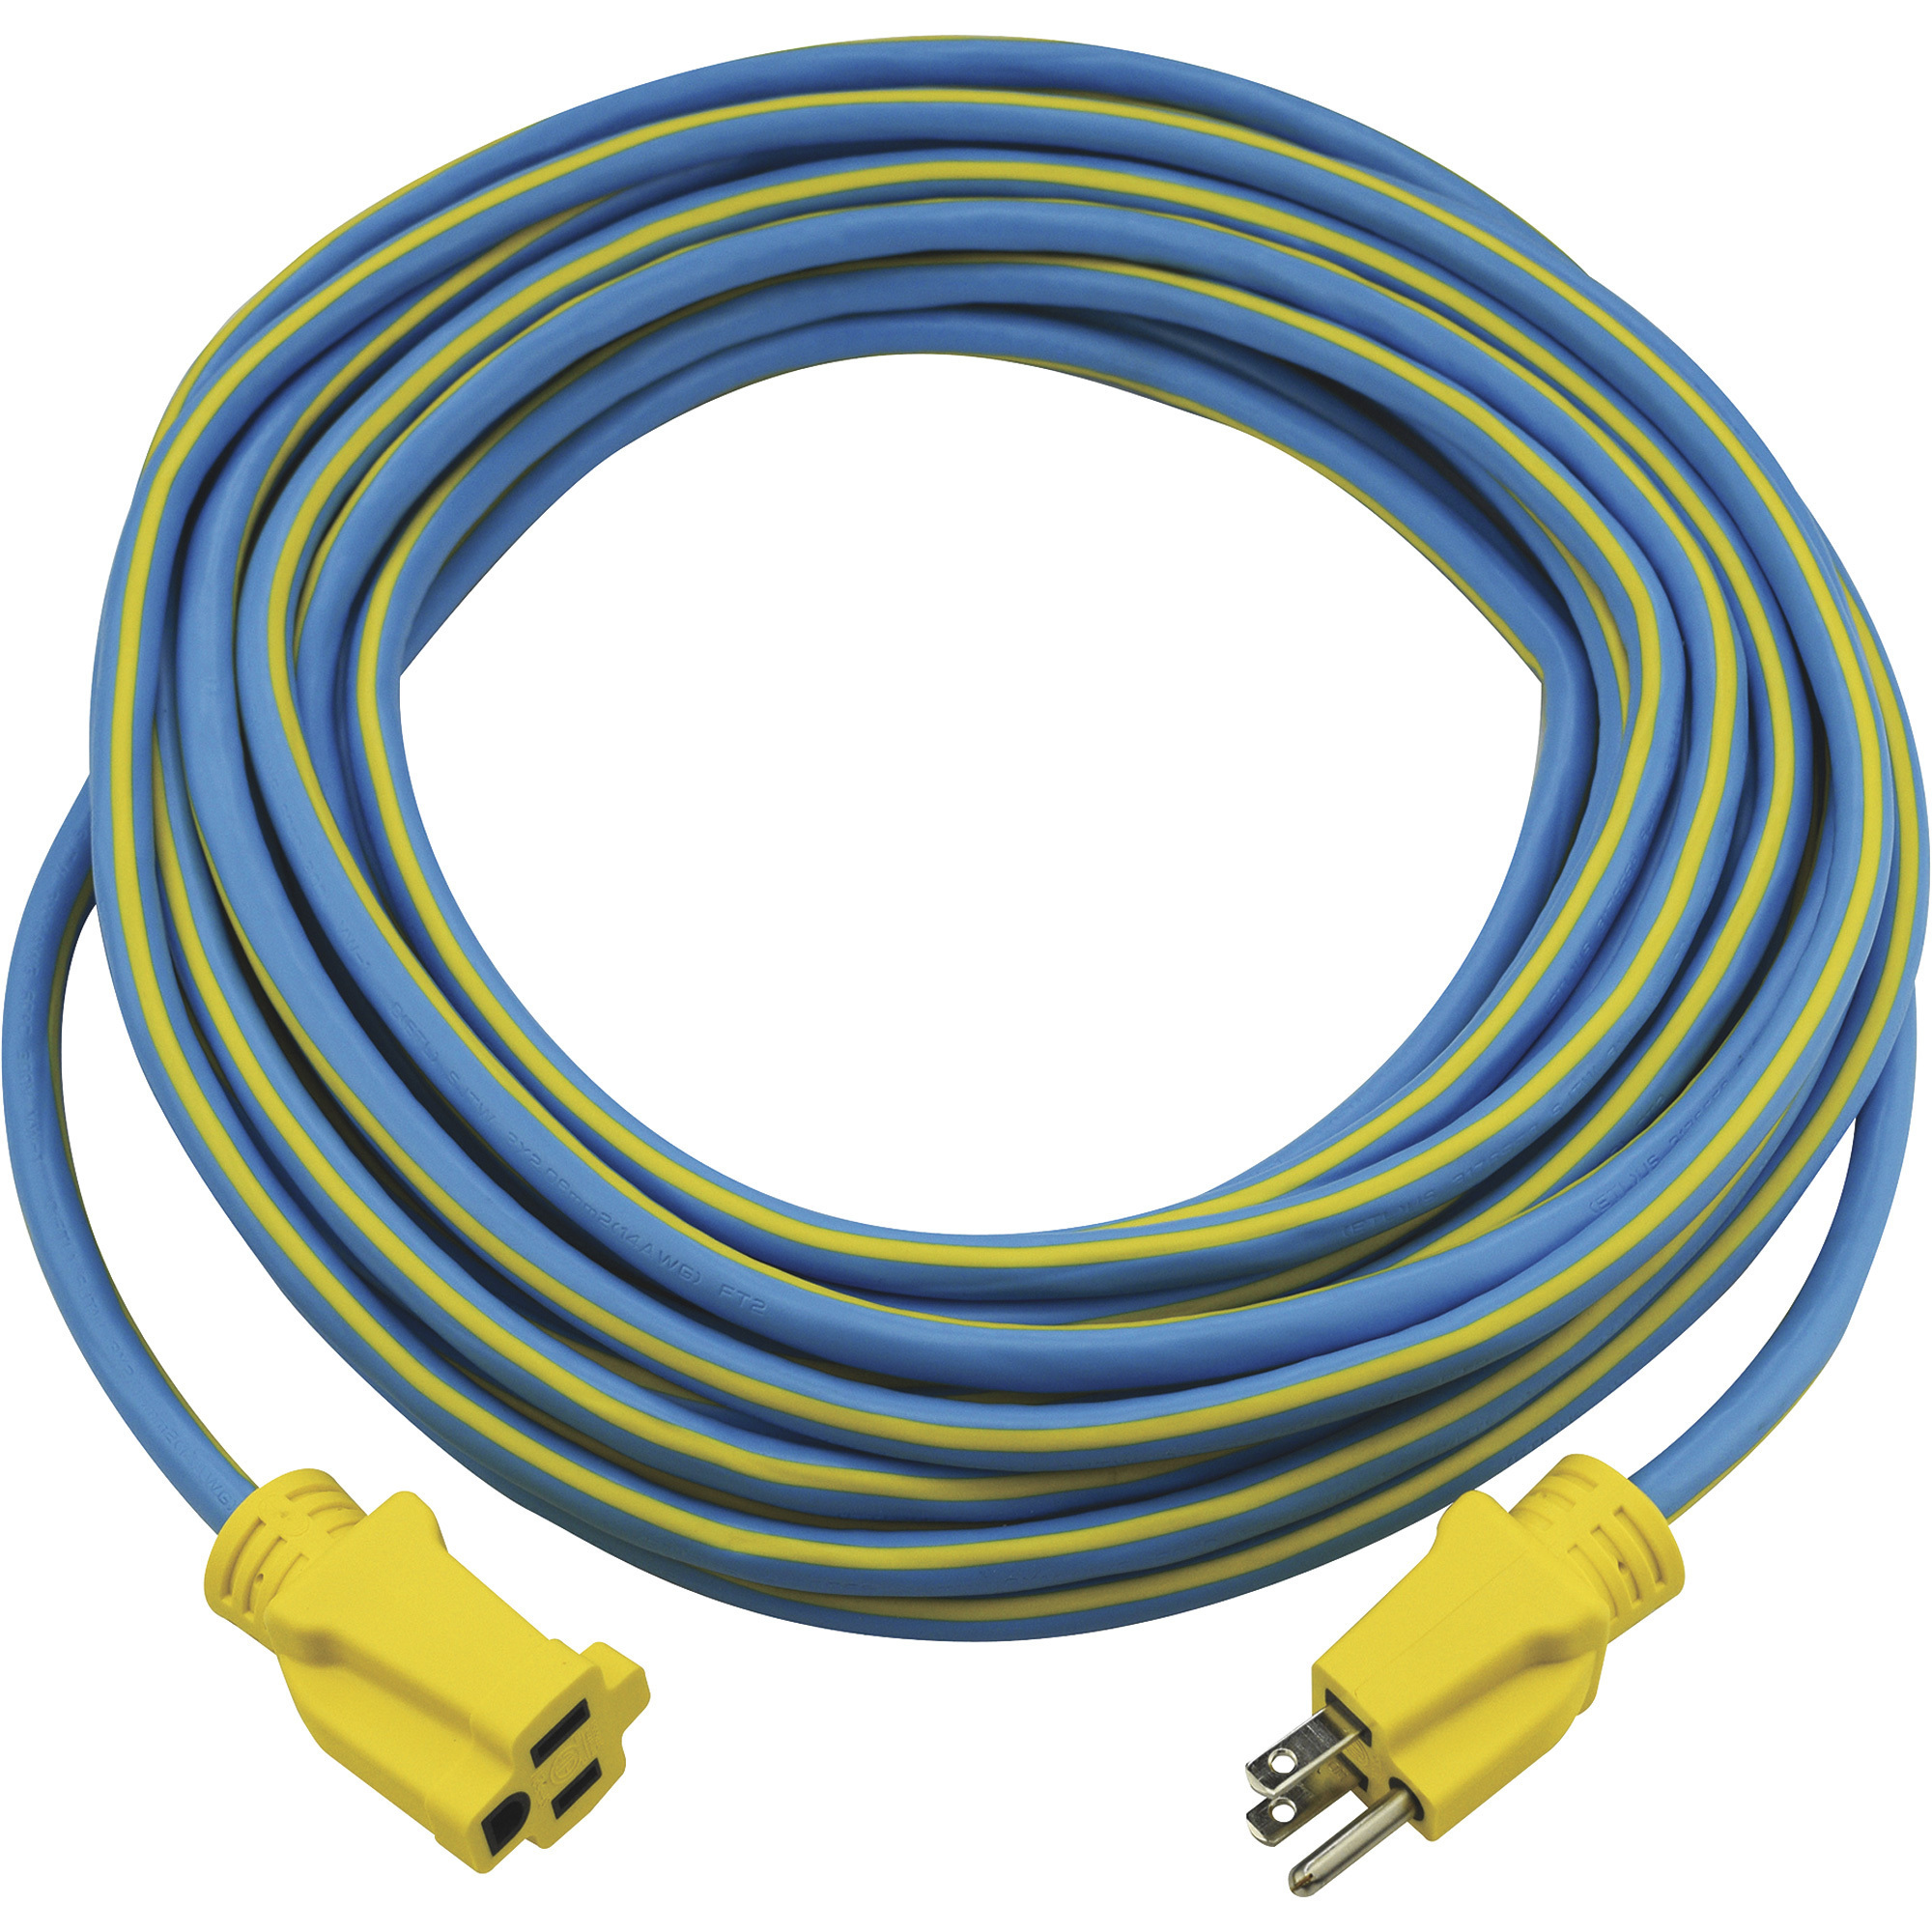 Prime Wire & Cable Outdoor Extension Cord â 50 Ft., 14/3 Gauge, 15 Amps, Blue/Yellow, Model KC506730